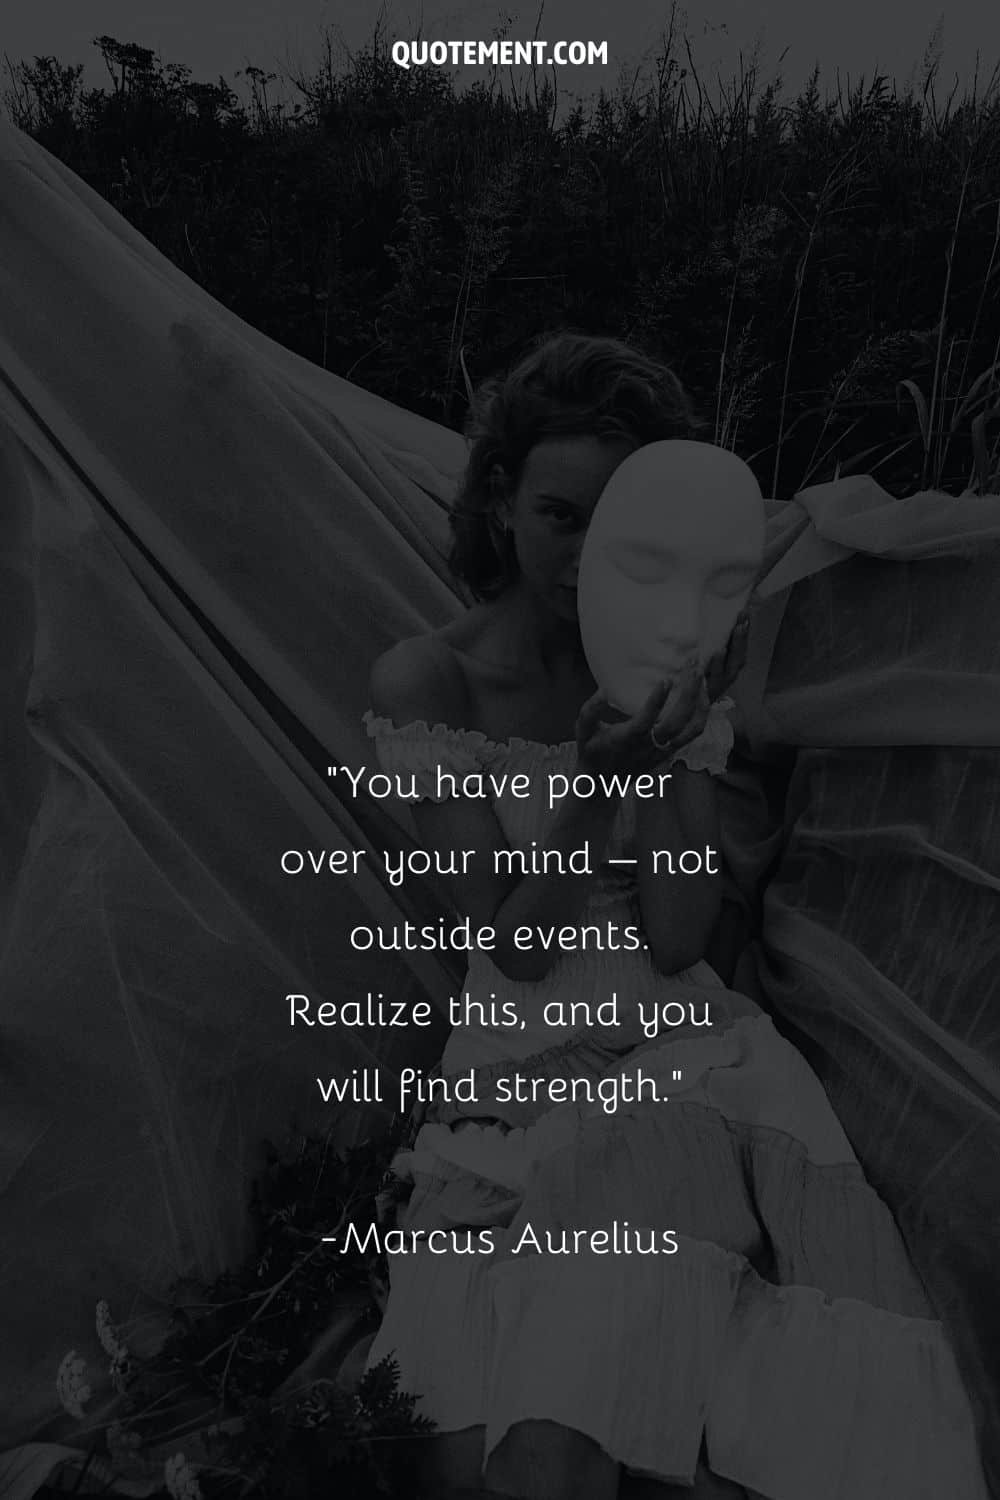 girl holding a mask representing quote by Marcus Aurelius